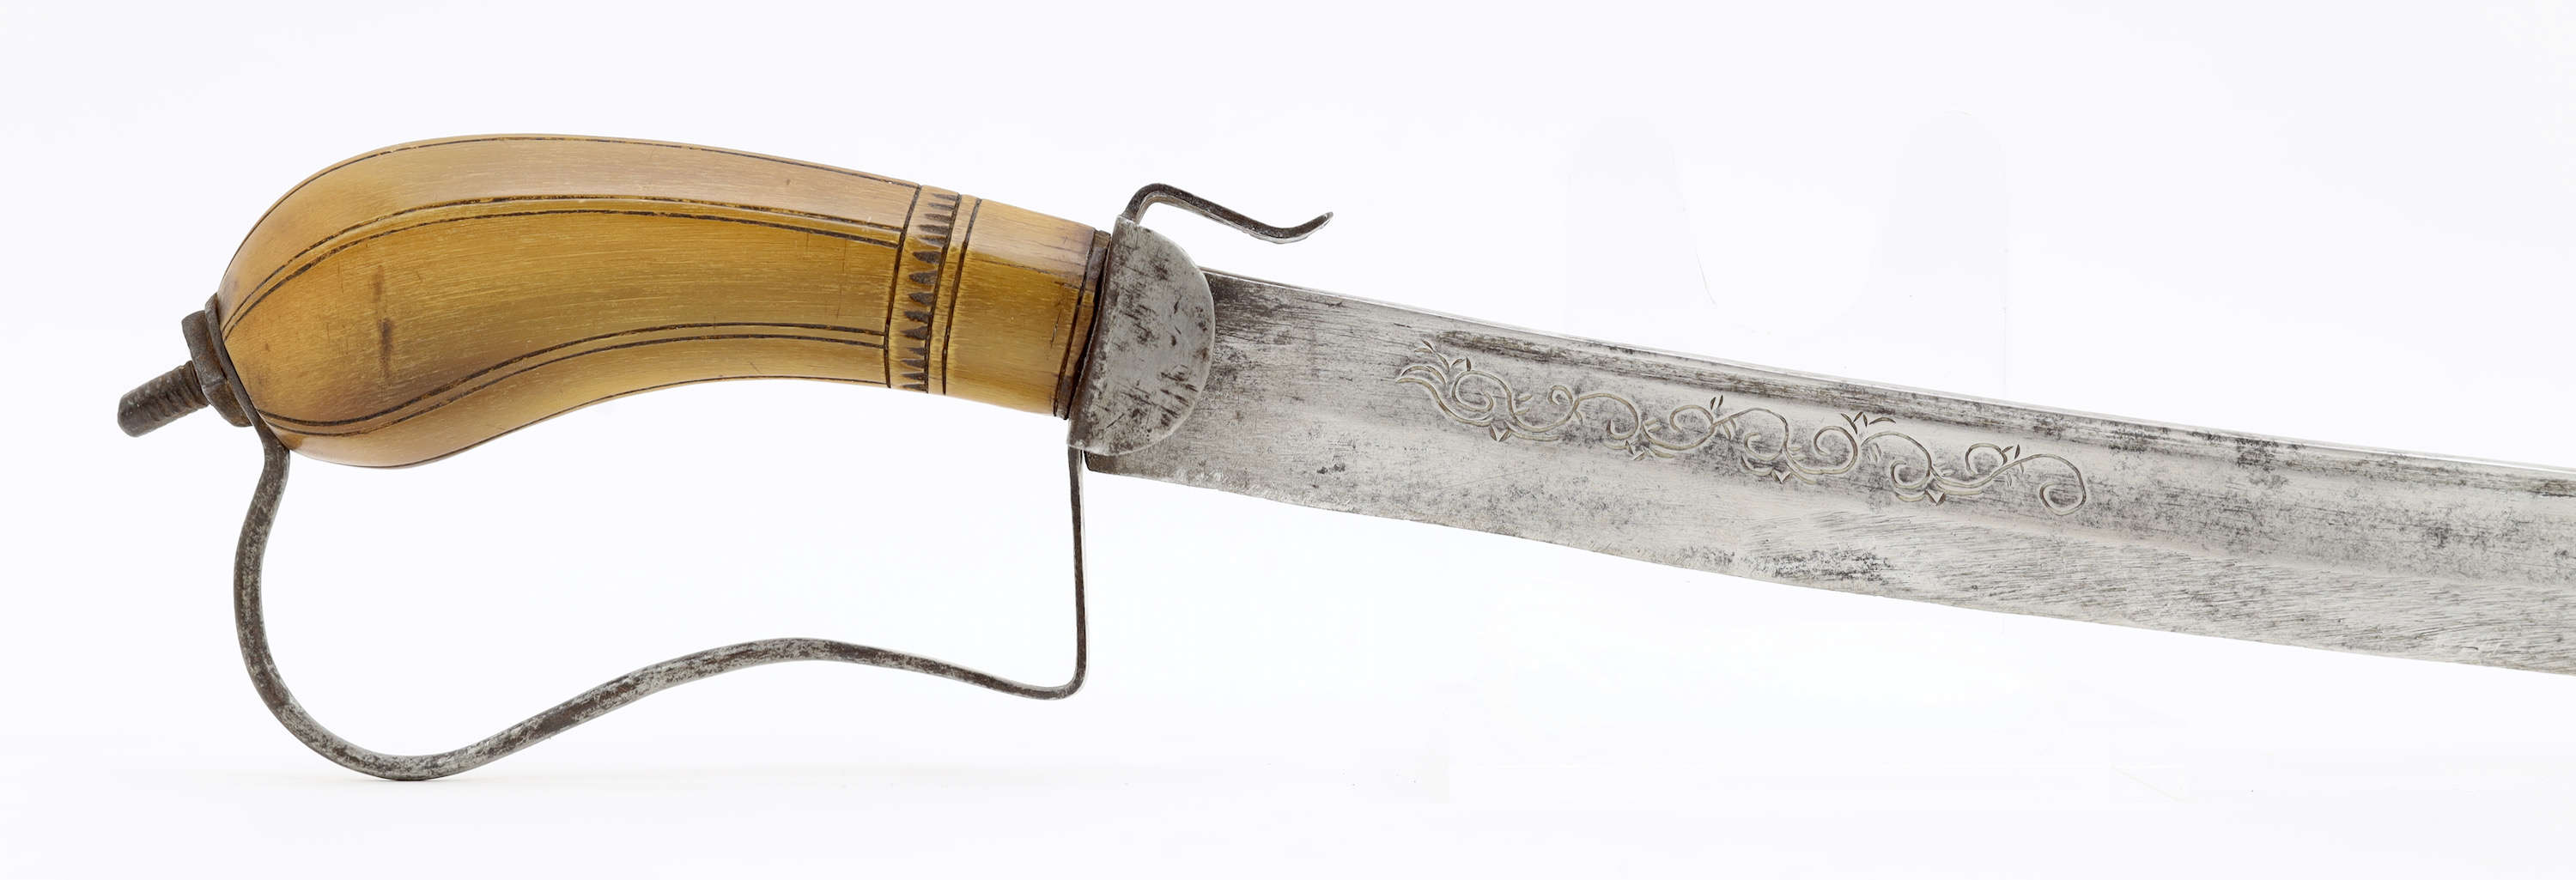 Indonesian colonial military saber